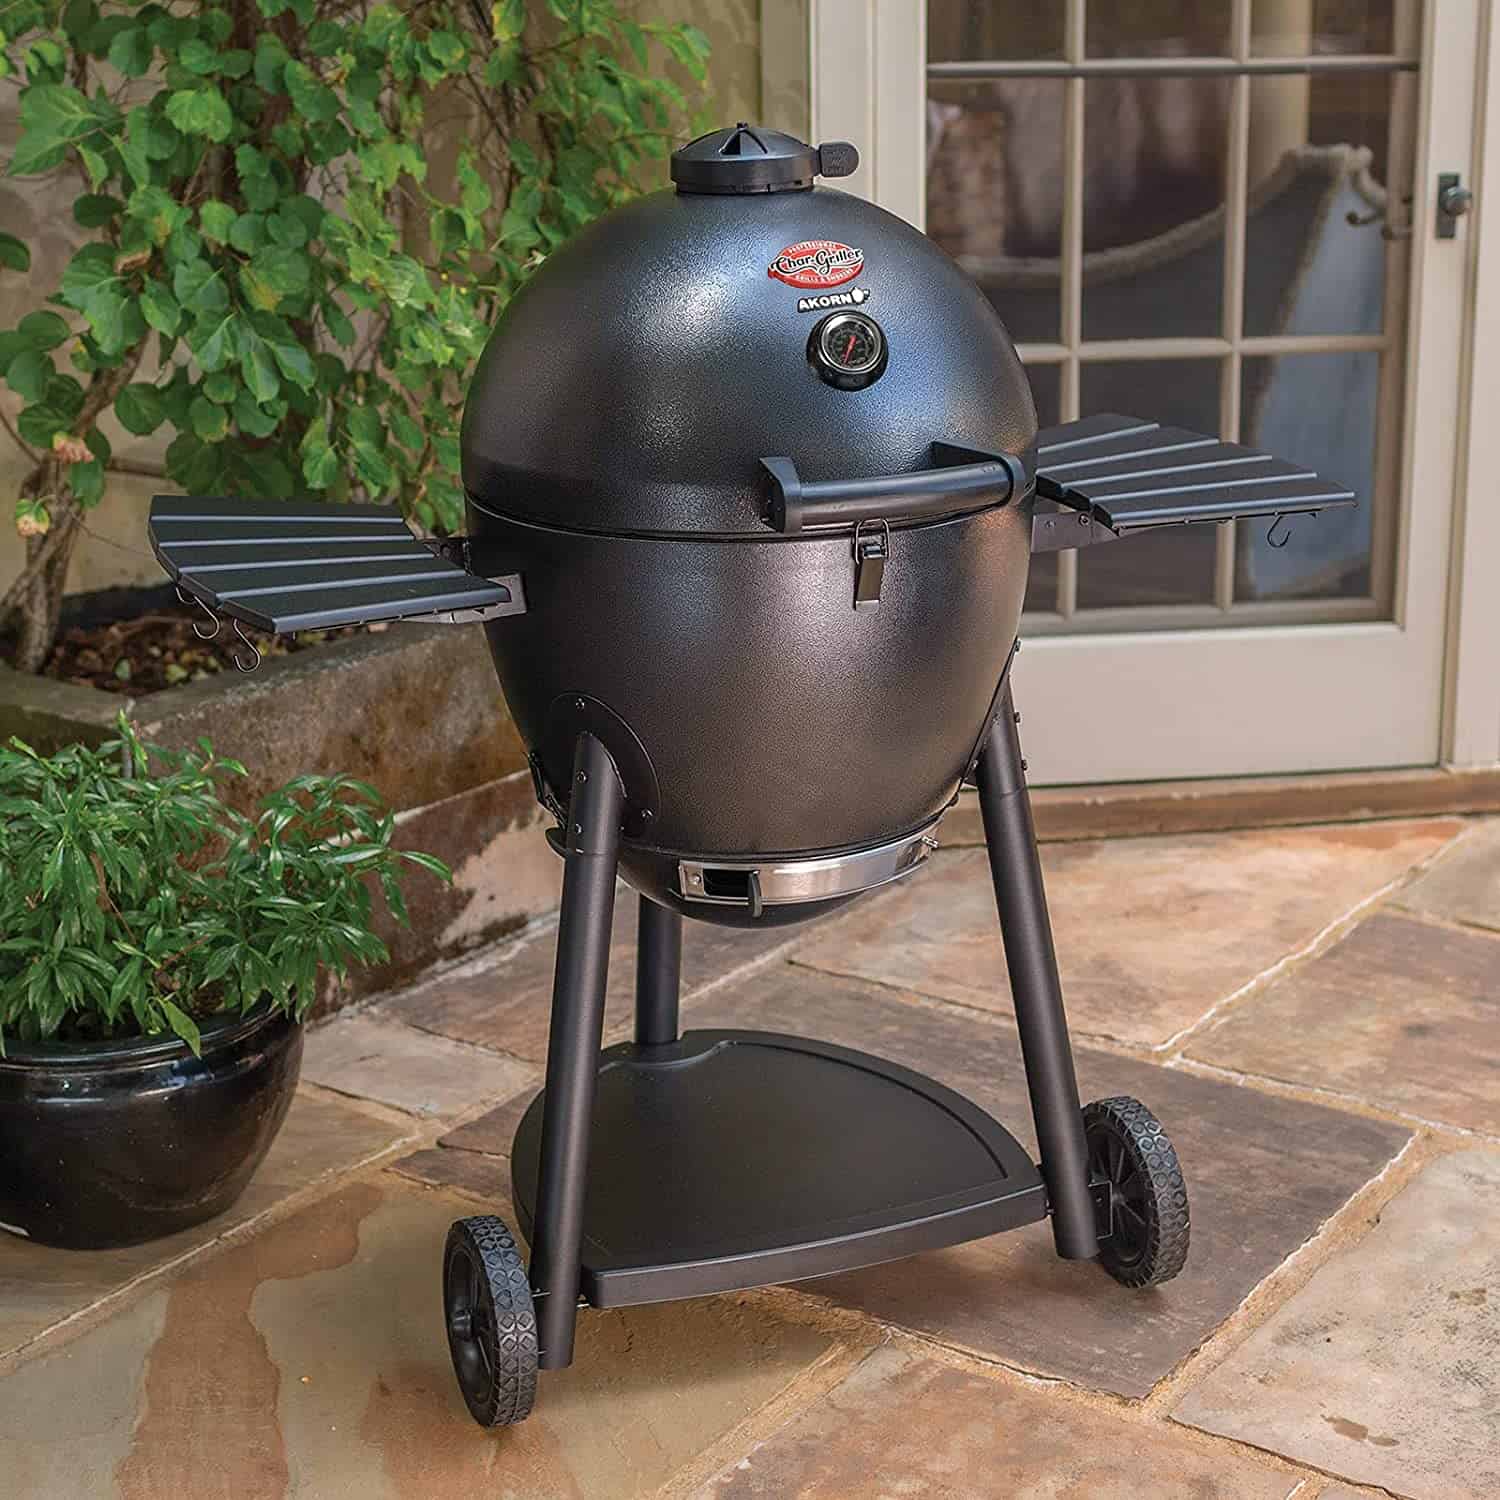 Most budget-friendly Kamado grill- Char Griller Akorn on patio